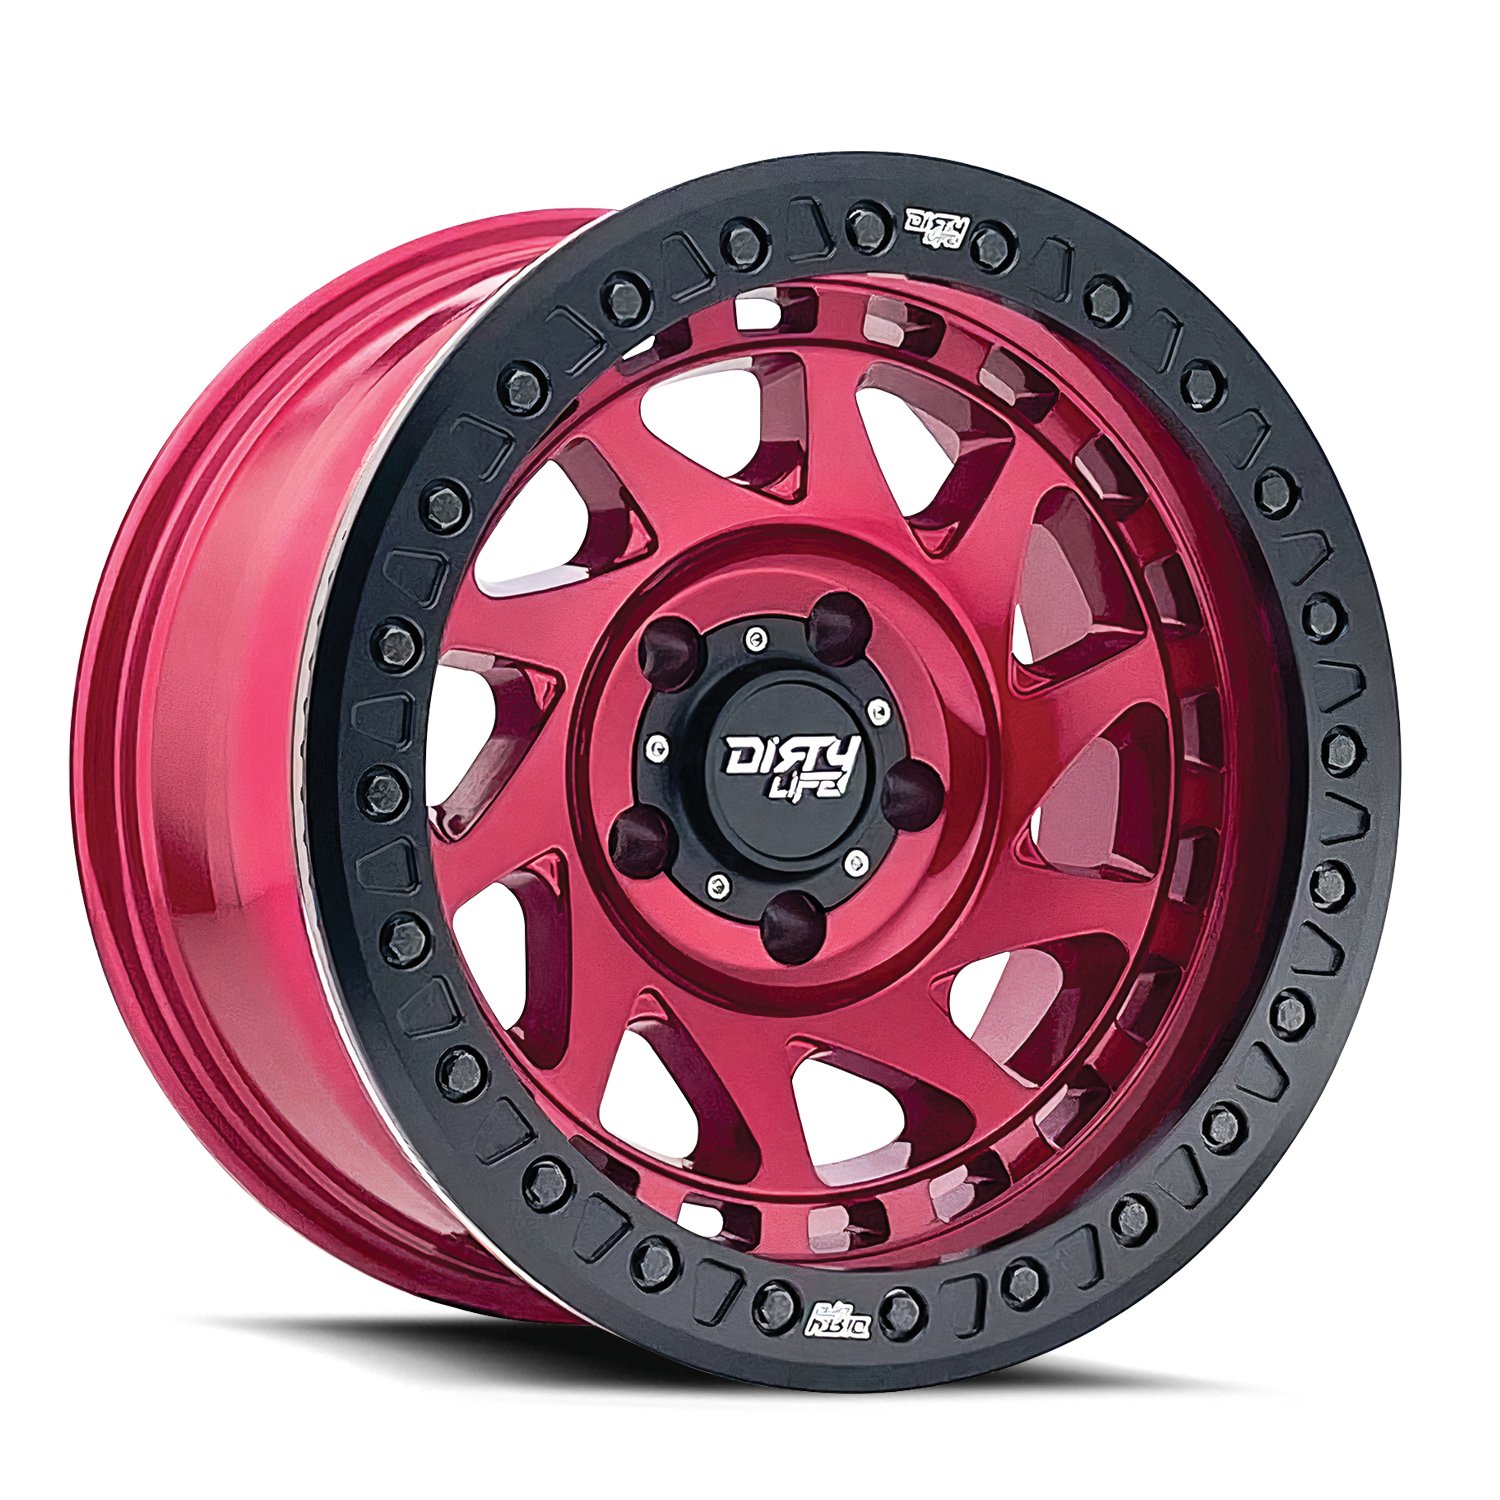 ENIGMA RACE 9313 Wheel Size: 17 X 9" Bolt Pattern: 5-127 [CRIMSON CANDY RED]